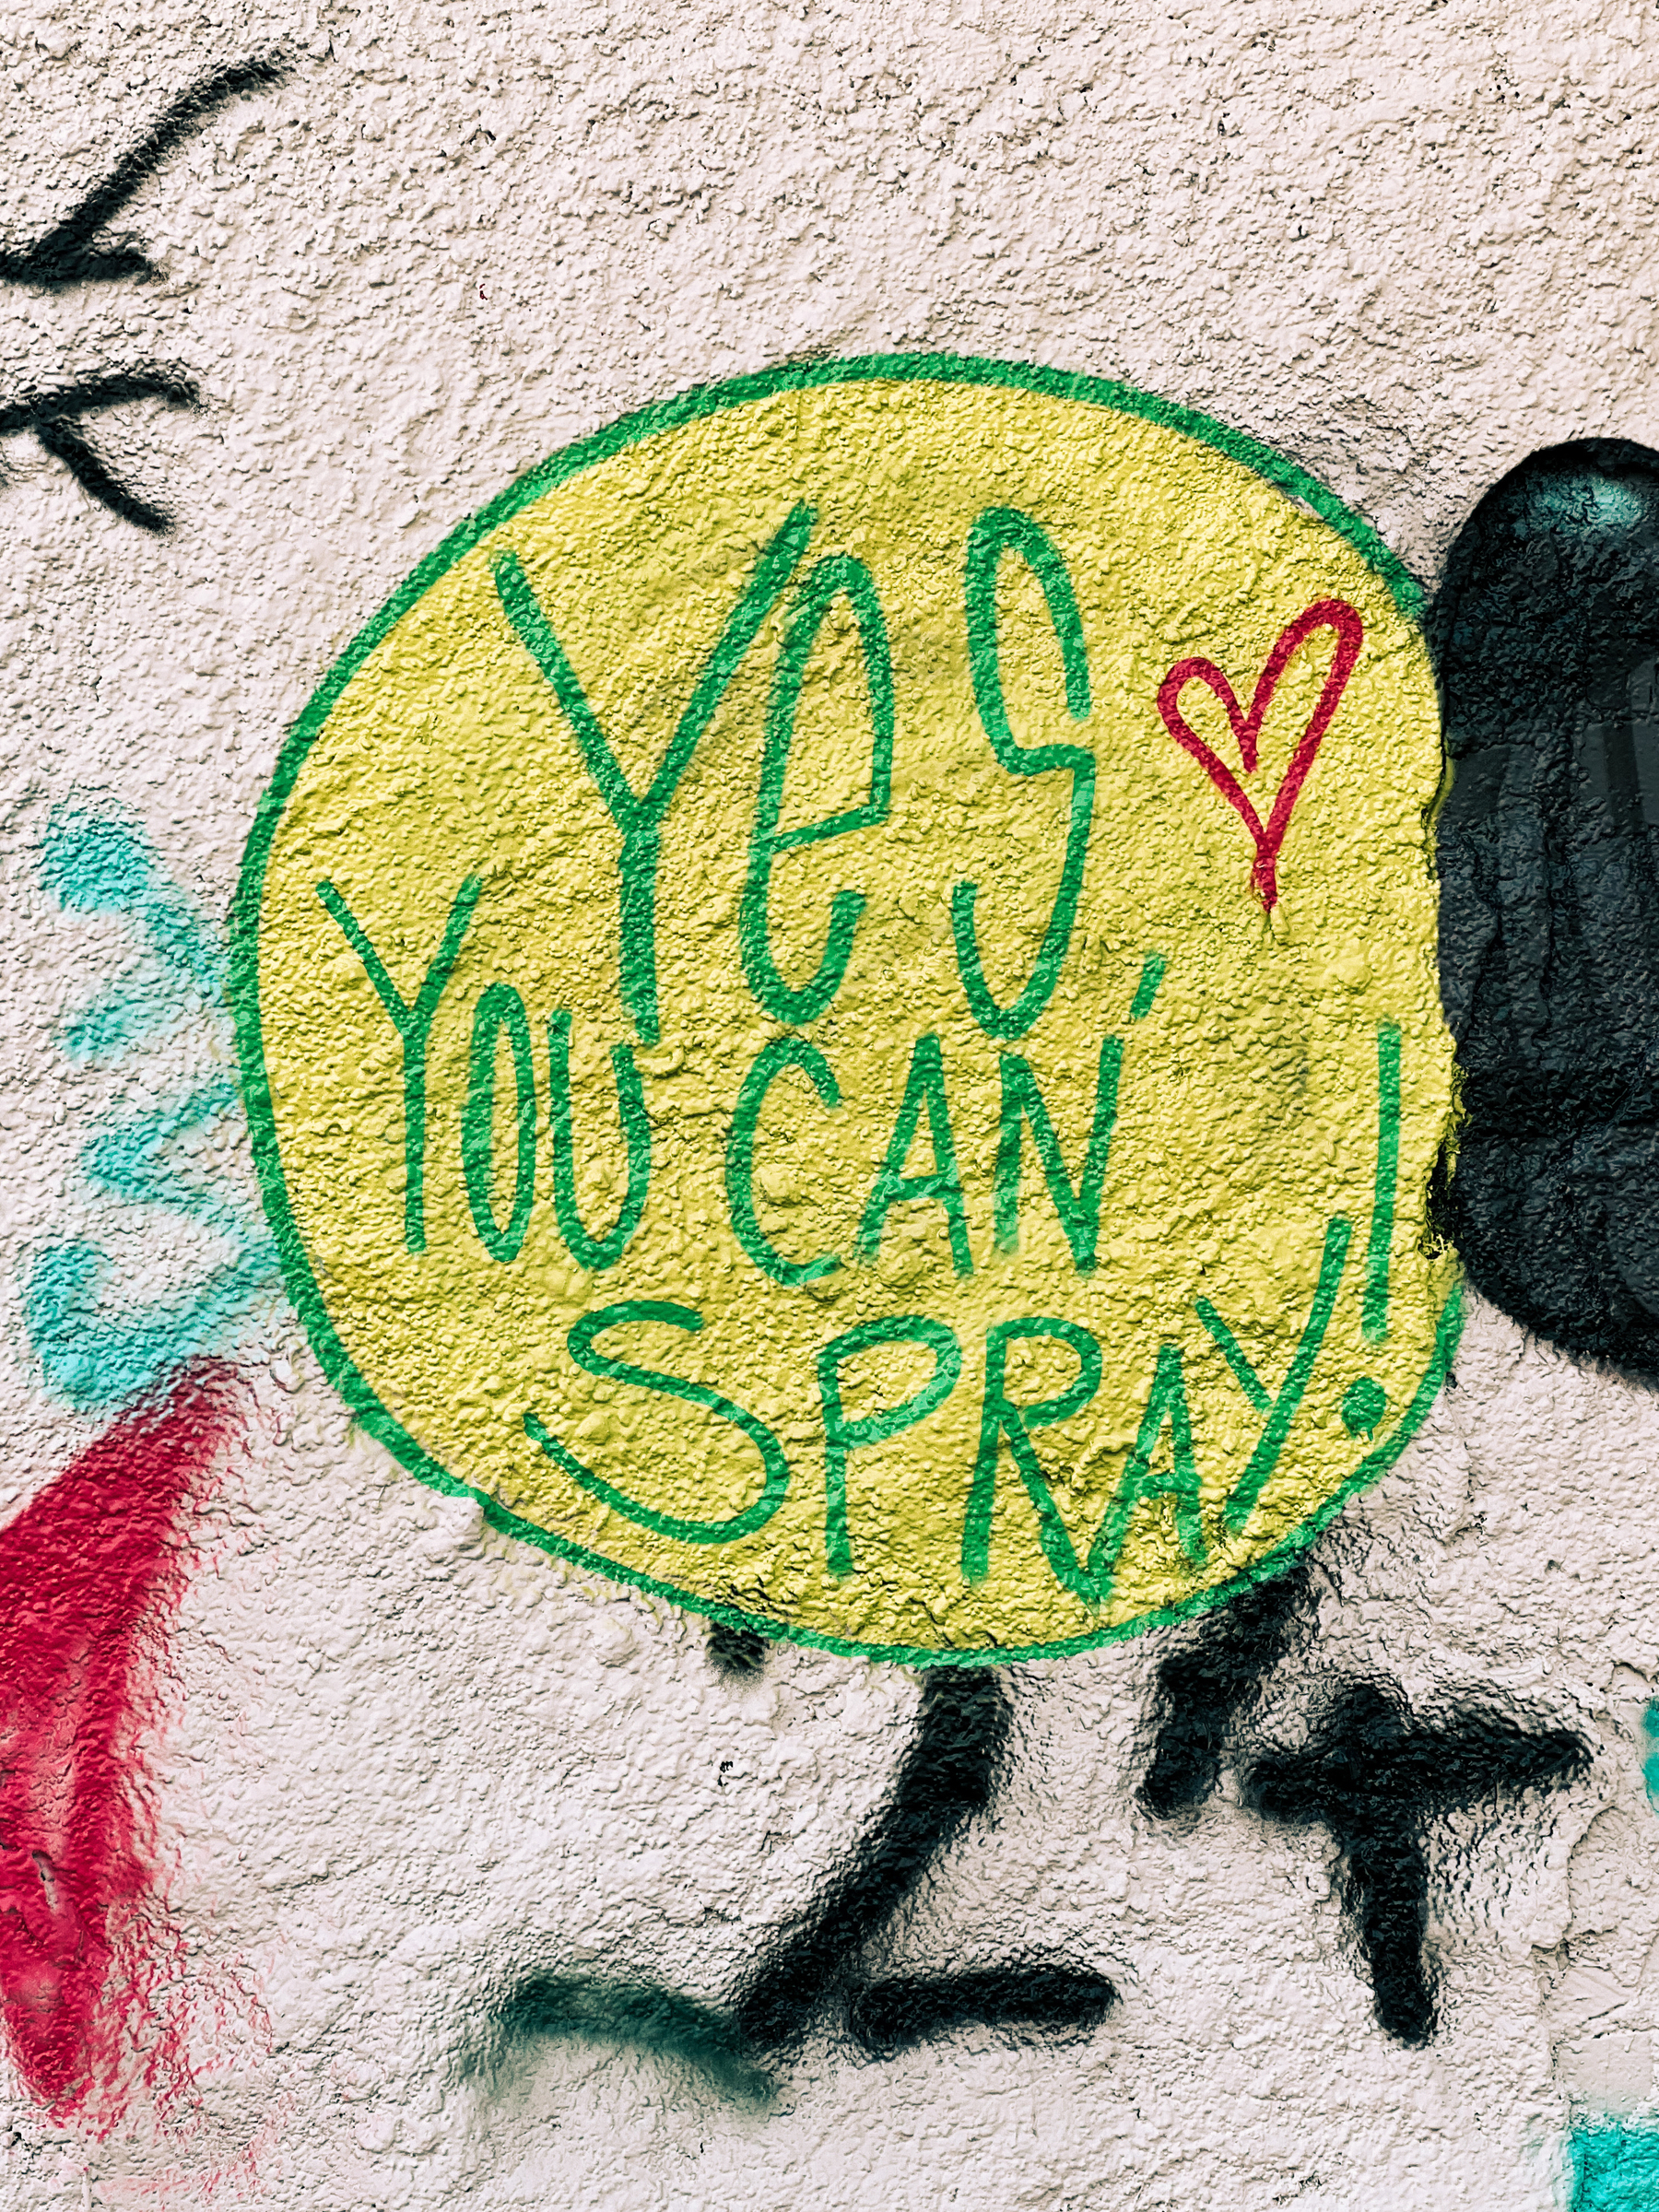 A graffiti on a wall. It says “Yes, you can spray”. 